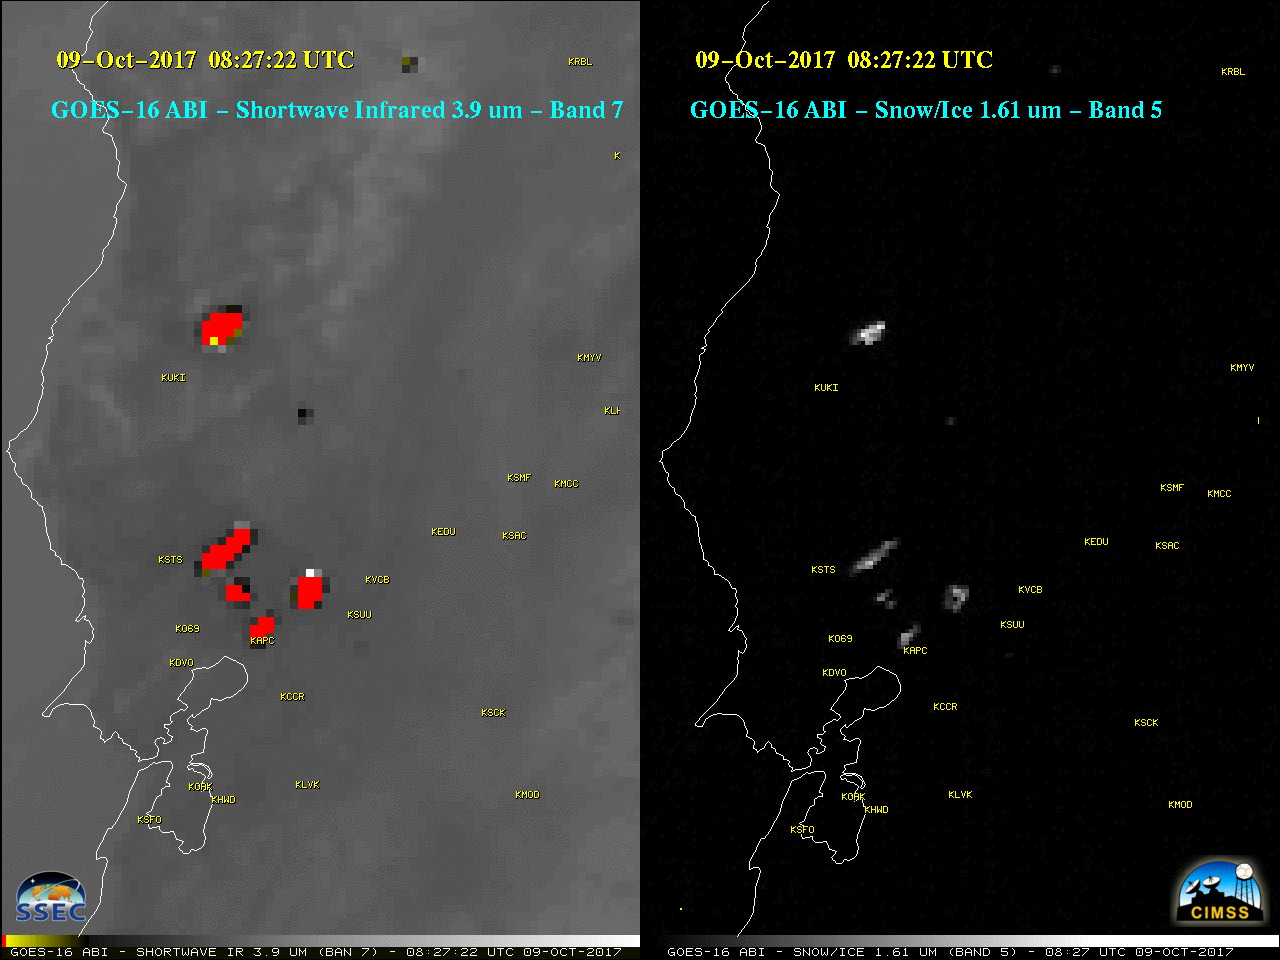 GOES-16 Shortwave Infrared (3.9 µm, left) and Near-Infrared 